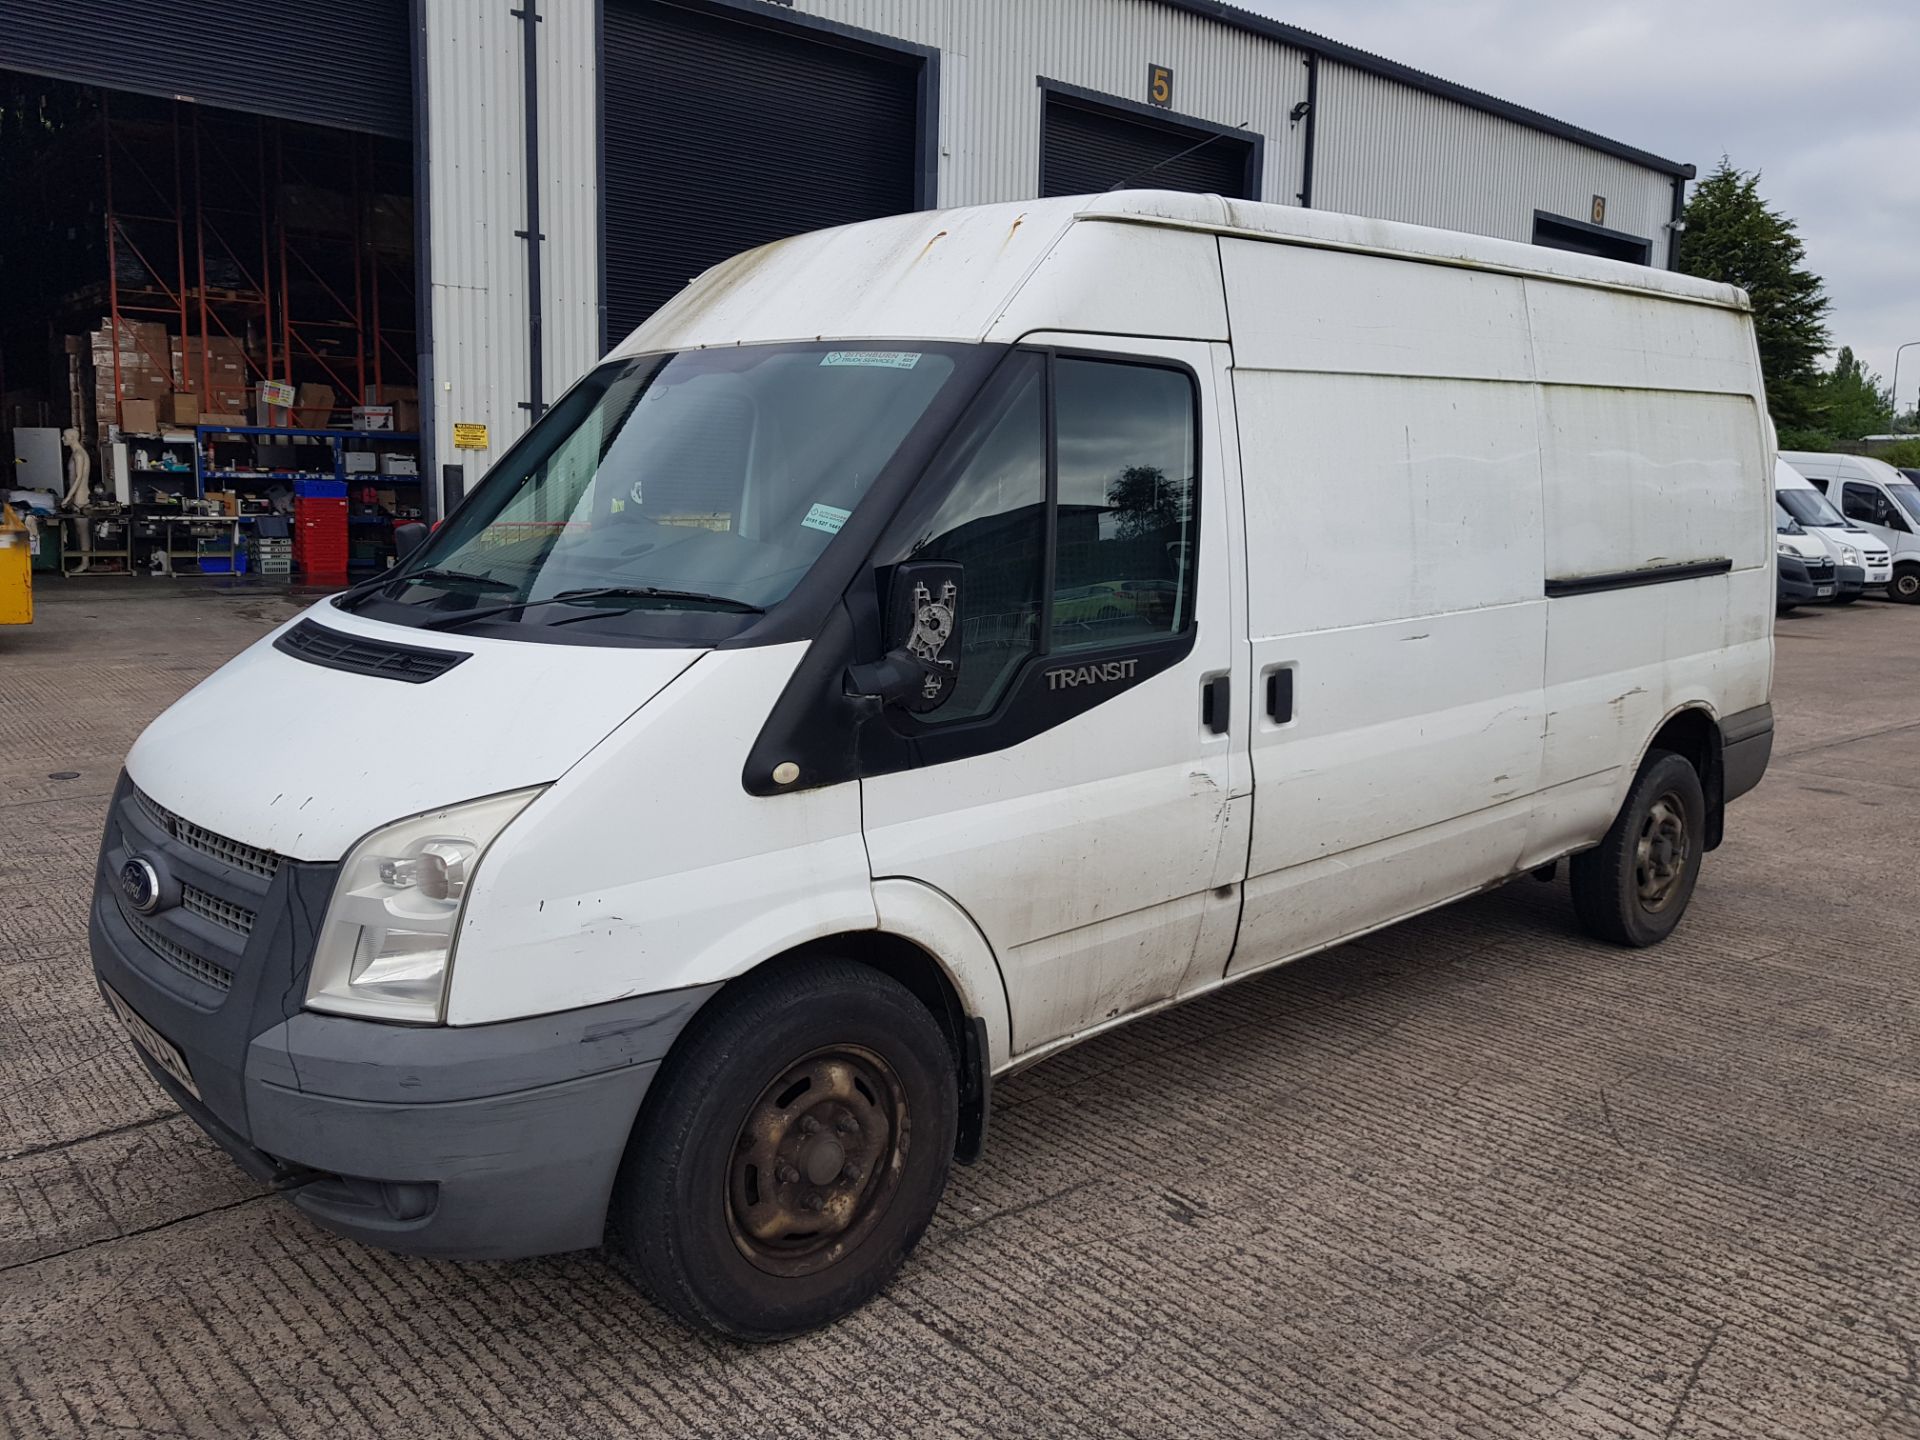 WHITE FORD TRANSIT 125 T350 RWD DIESEL PANEL VAN 2198CC FIRST REGISTERED 11/2/2014 REG: YT63ZXX - Image 2 of 11